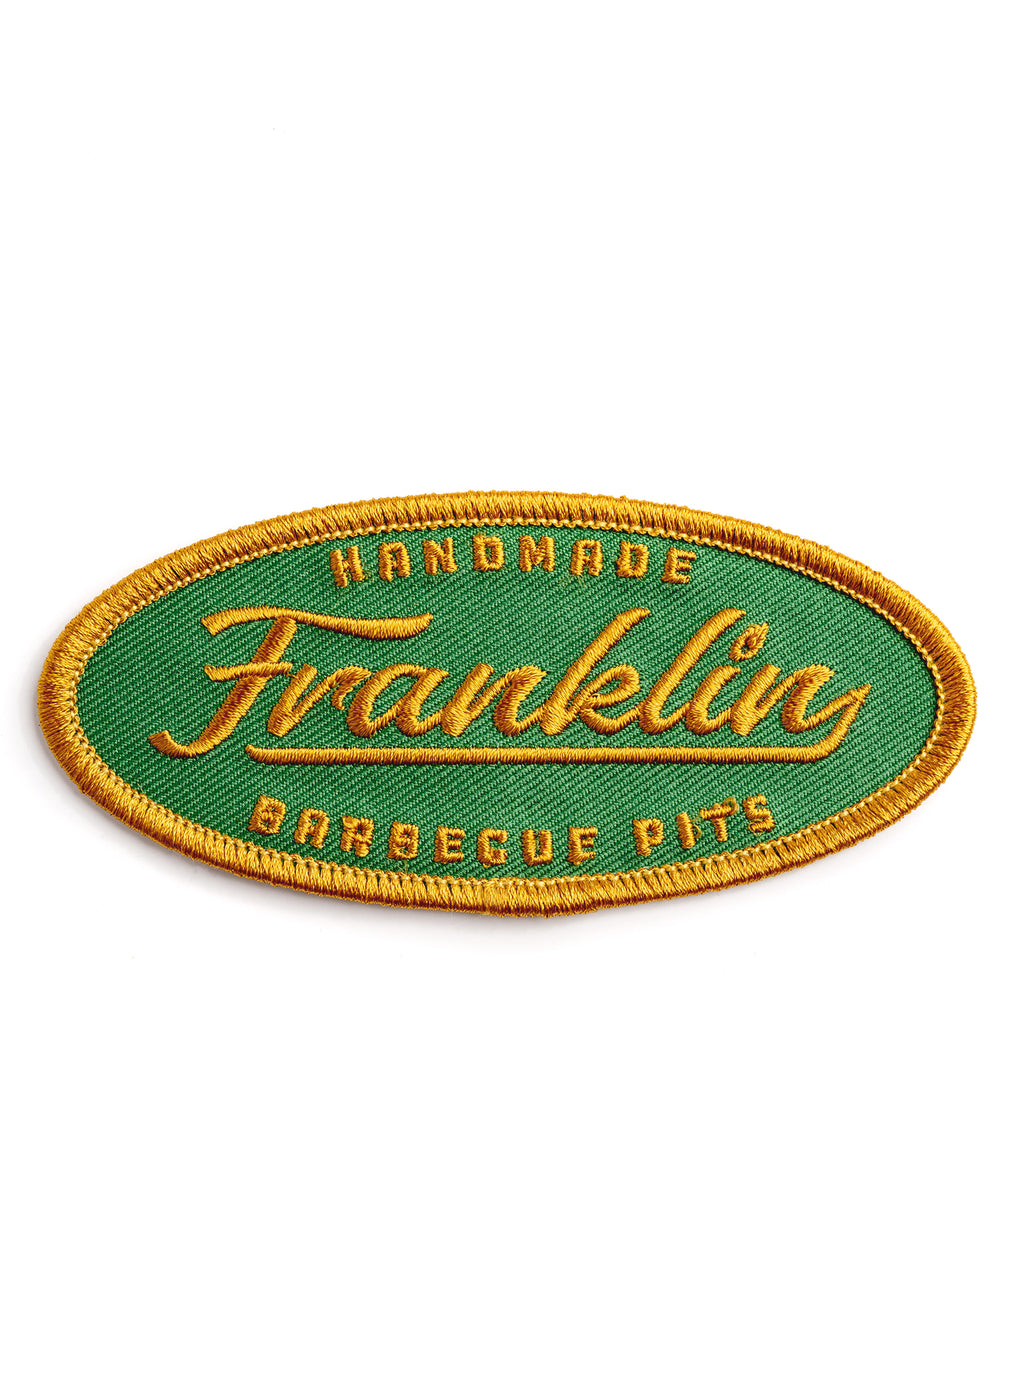 Franklin BBQ Pits Coldie Holdie – Franklin Barbecue